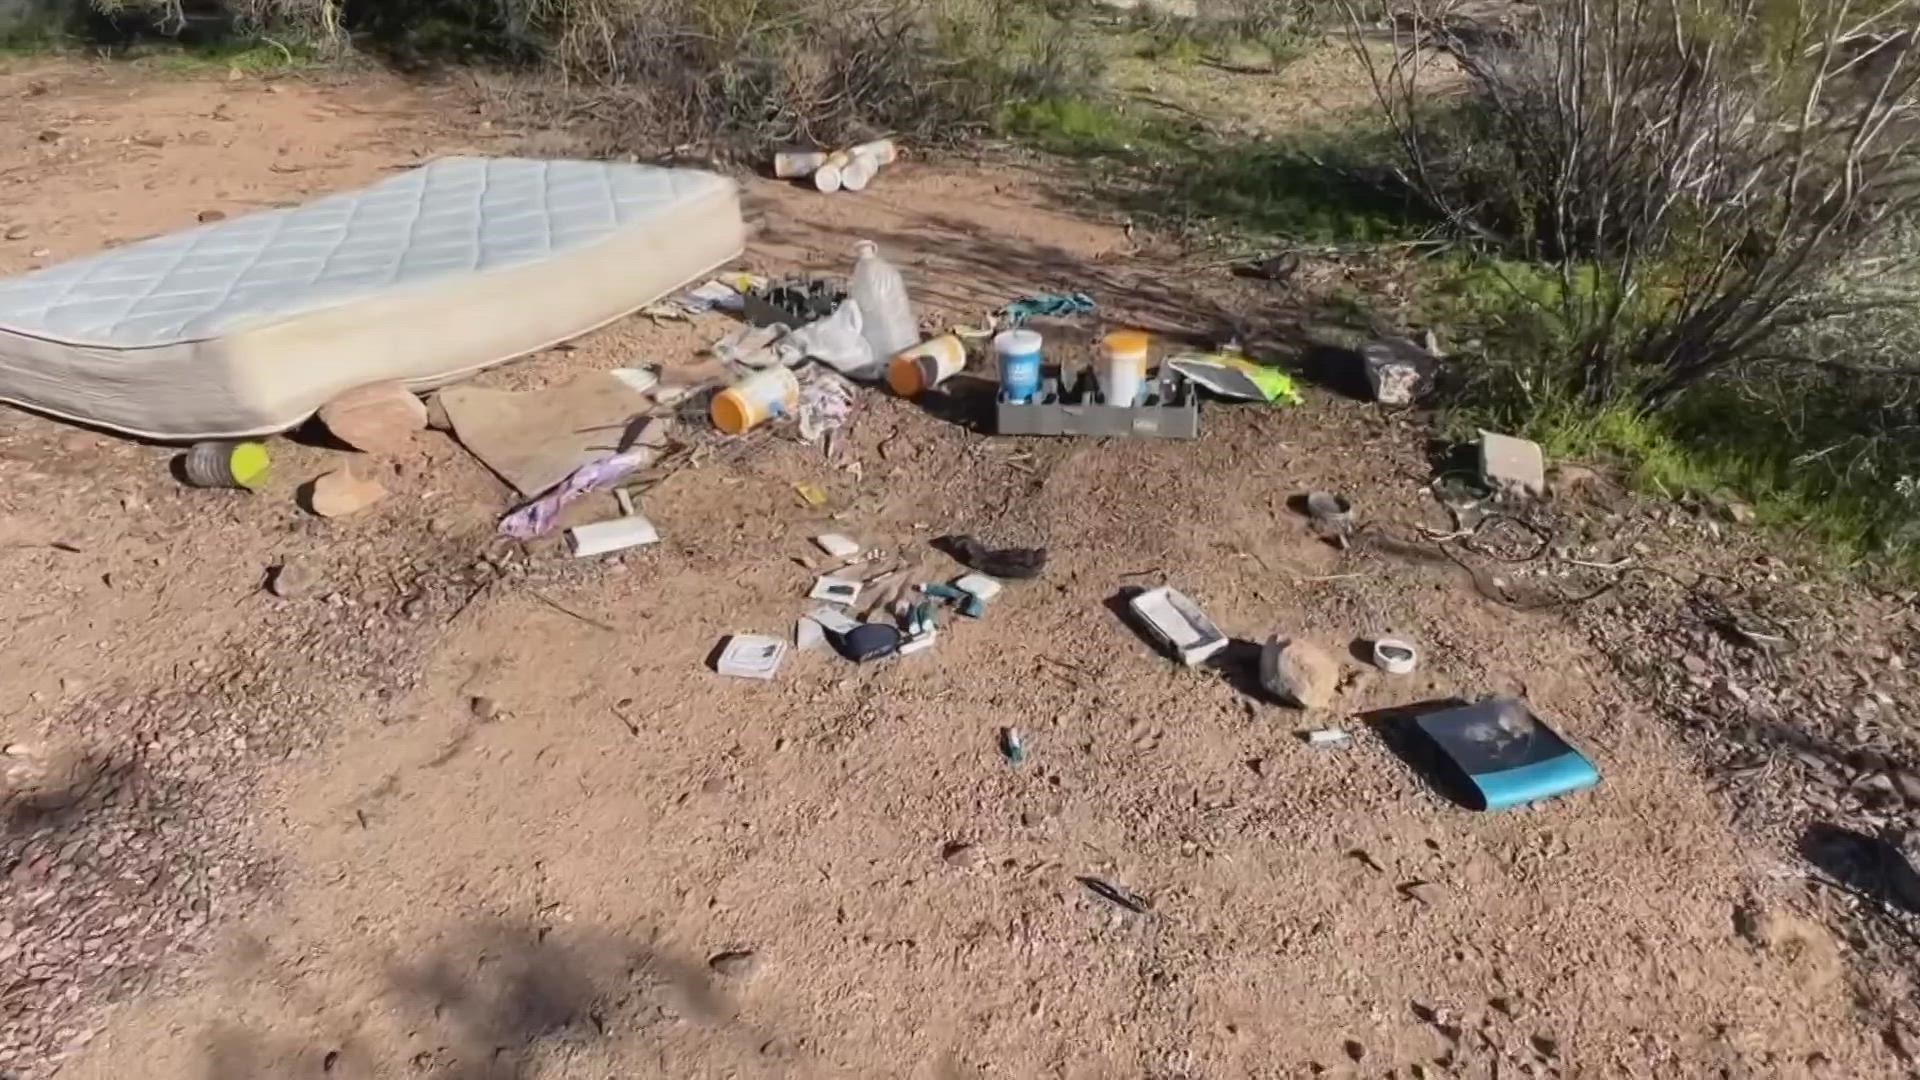 Residents of Apache Junction fed up over campers, squatters who camp illegally on public land